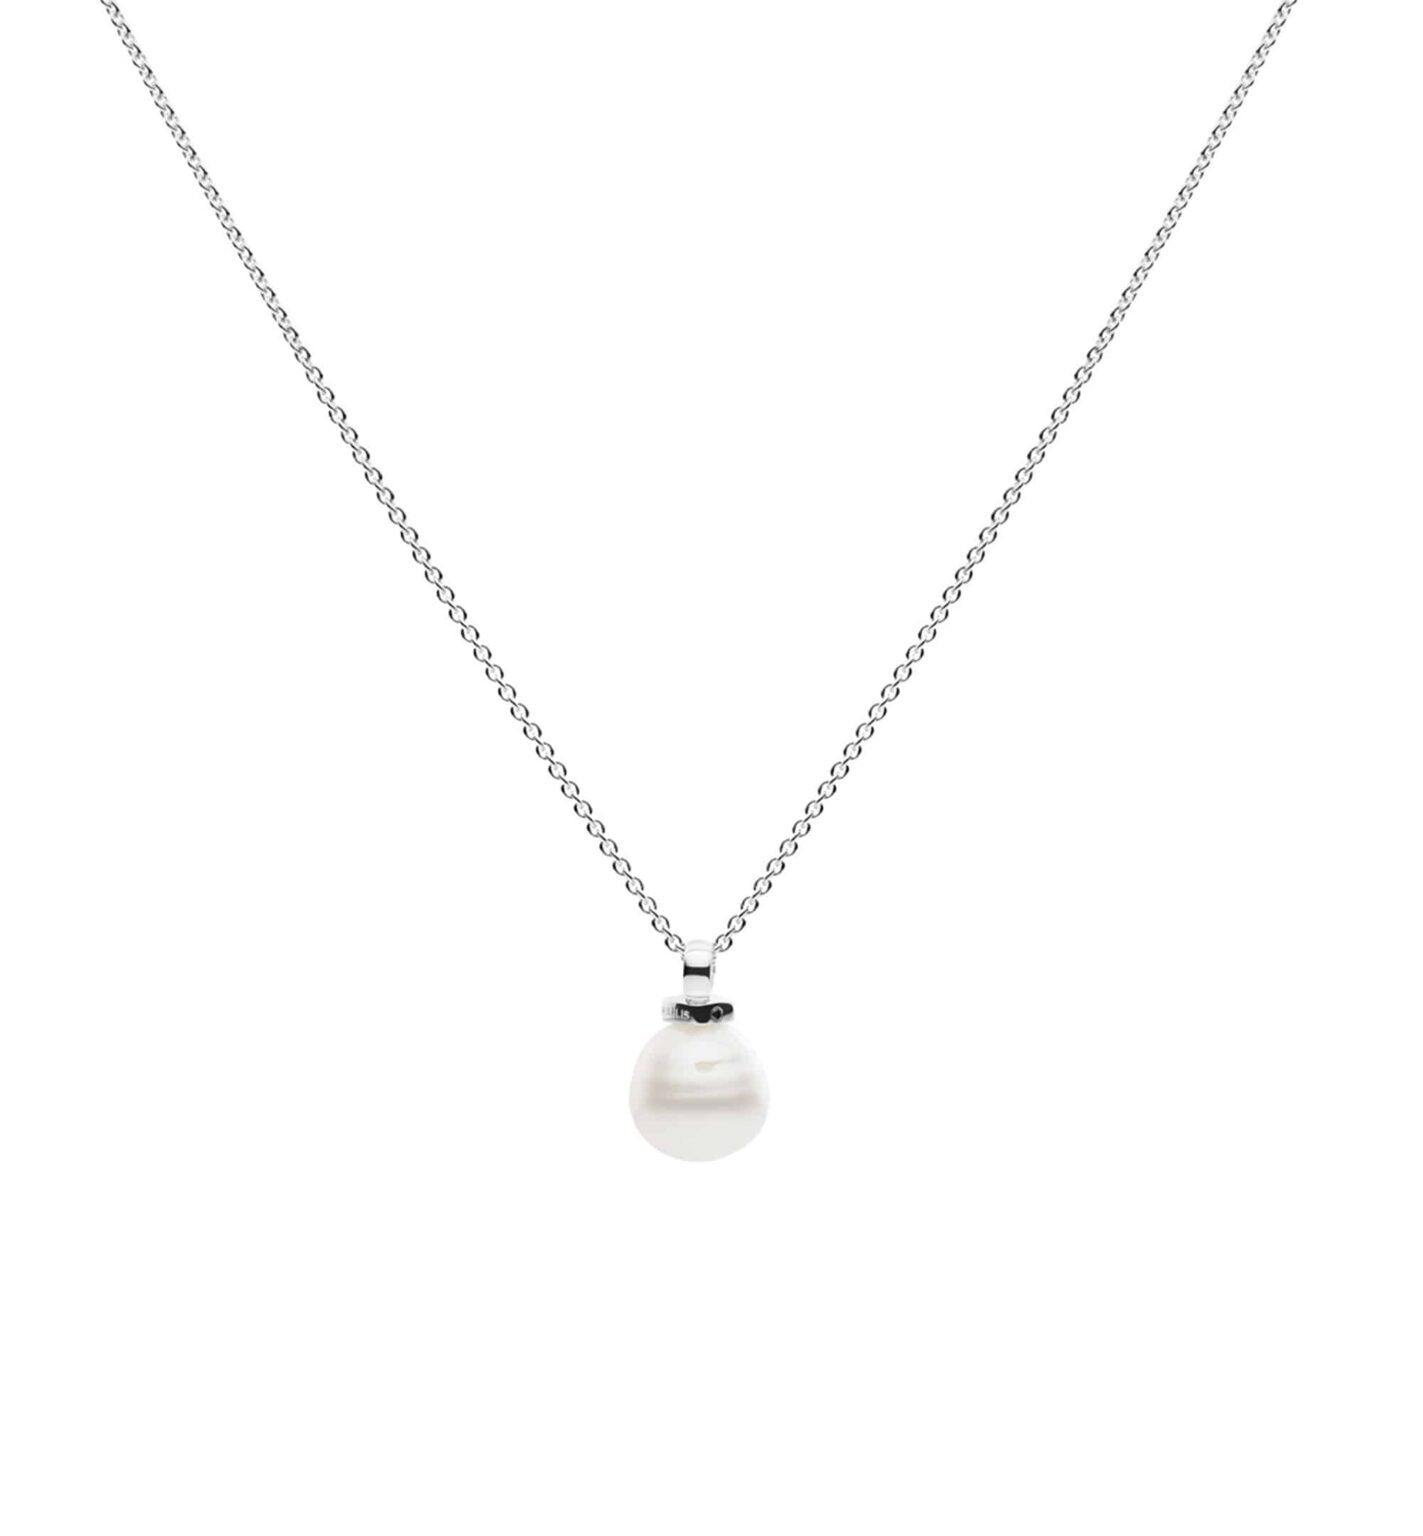 Silver Pearl Necklace - Geometric Necklace | Kailis Jewellery